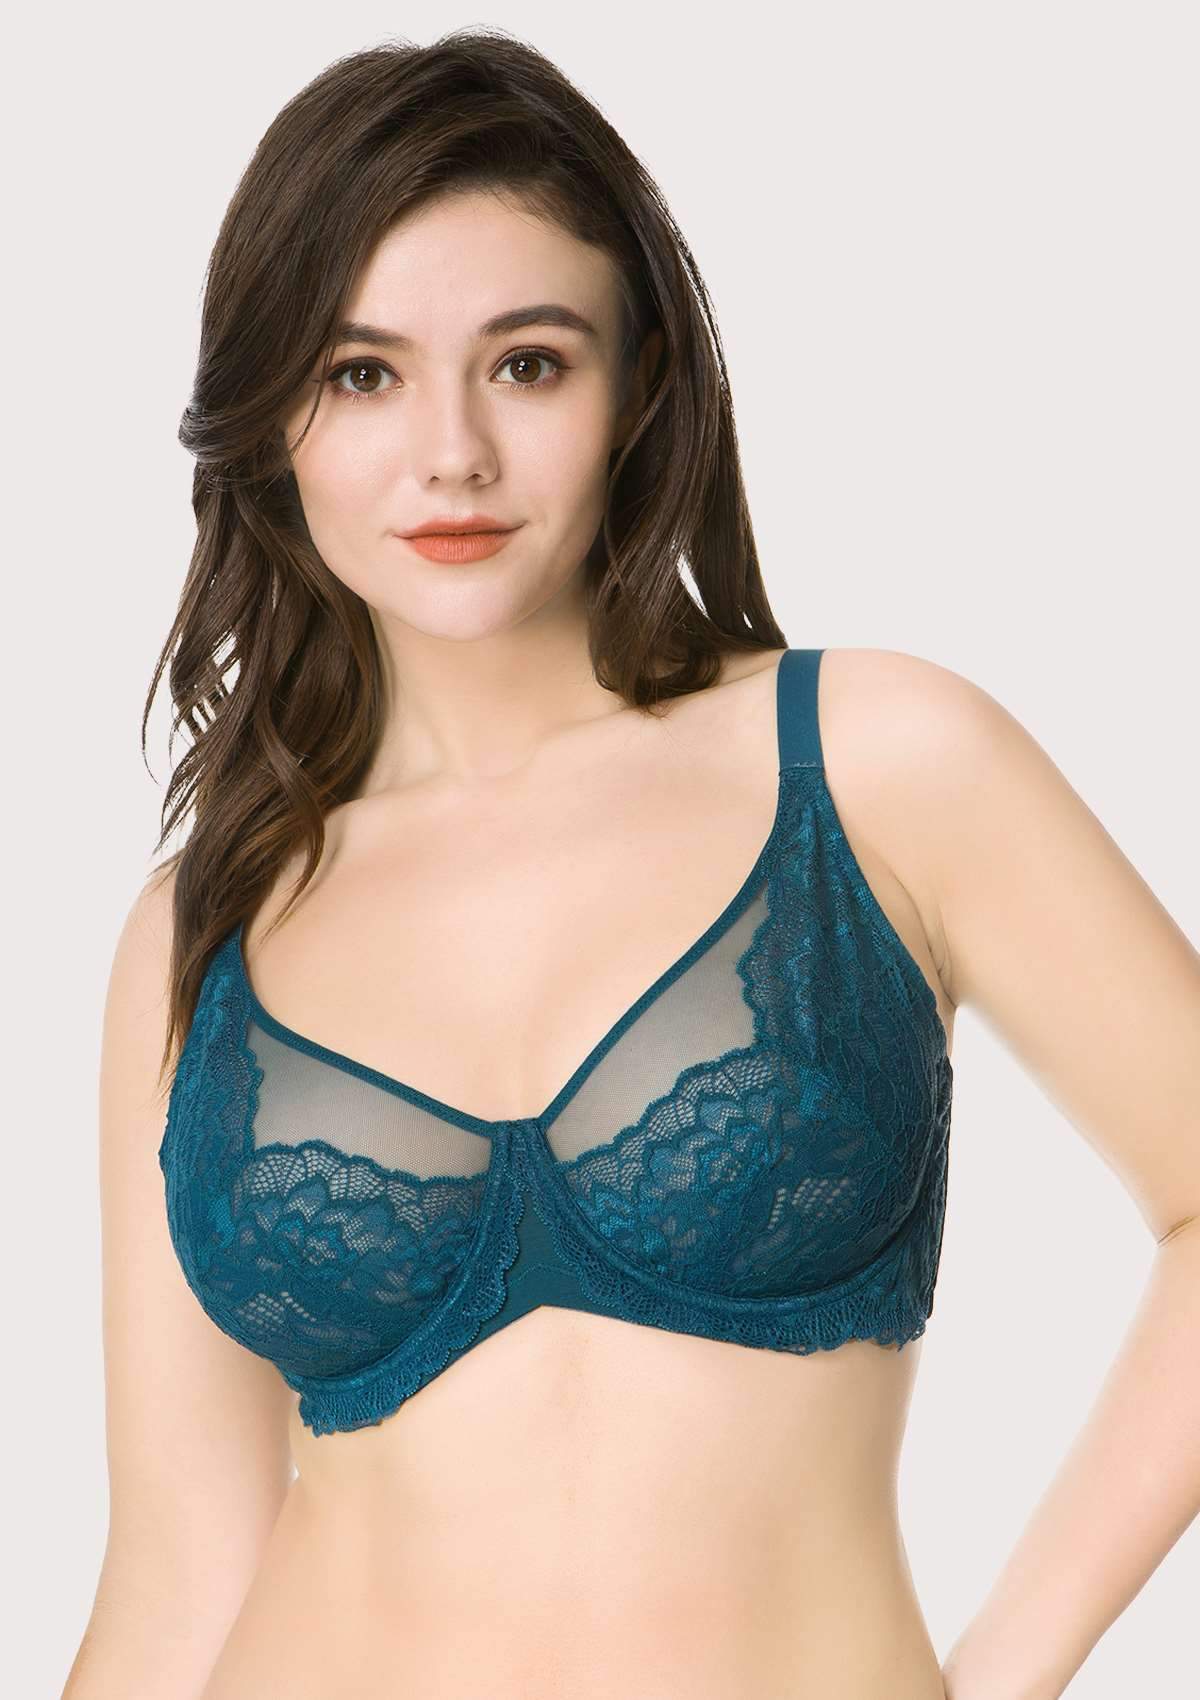 HSIA Peony Lace Unlined Supportive Underwire Bra - Dark Blue / 40 / D